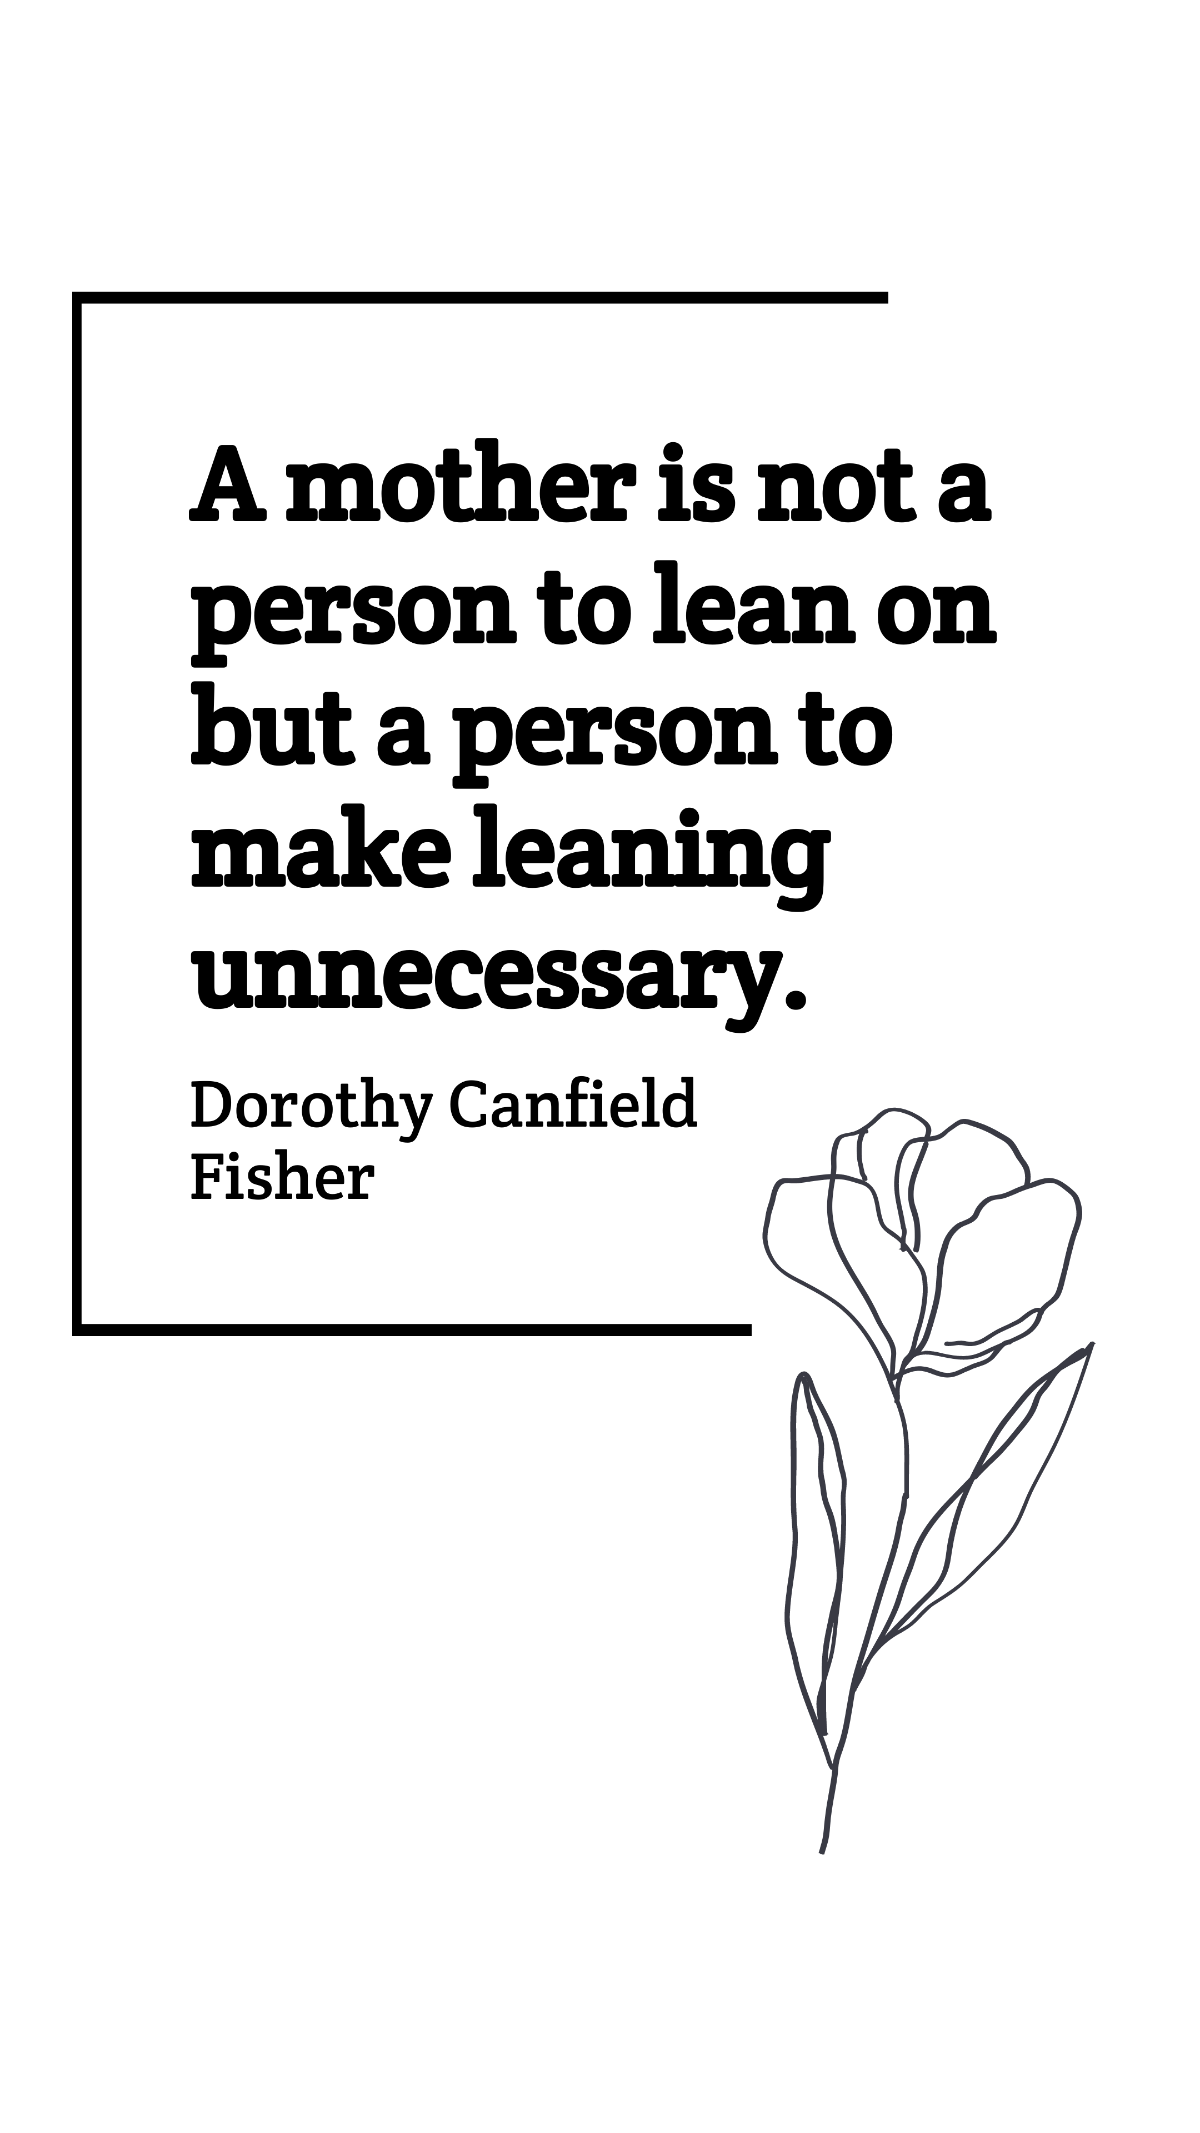 Dorothy Canfield Fisher - A mother is not a person to lean on but a person to make leaning unnecessary.